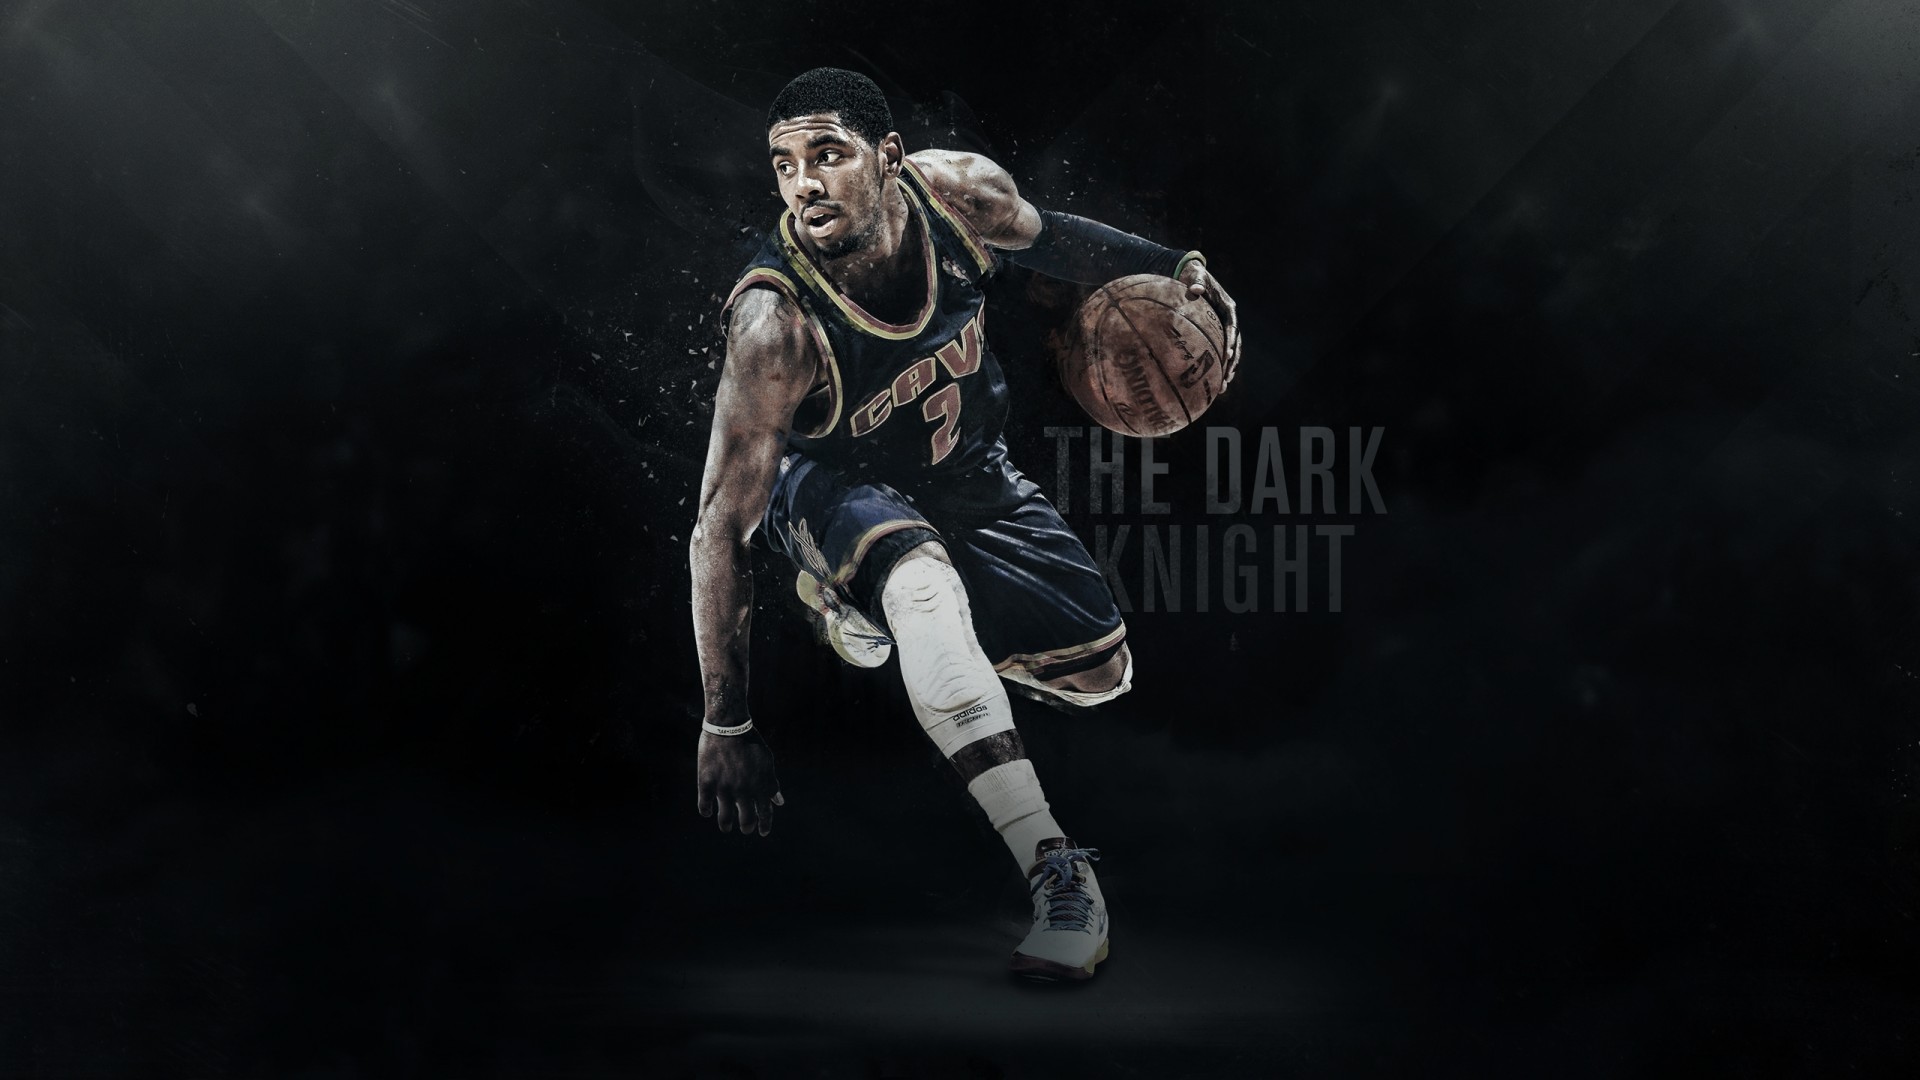 Bwack basketball player wallpapers and images - wallpapers, pictures, photos1920 x 1080